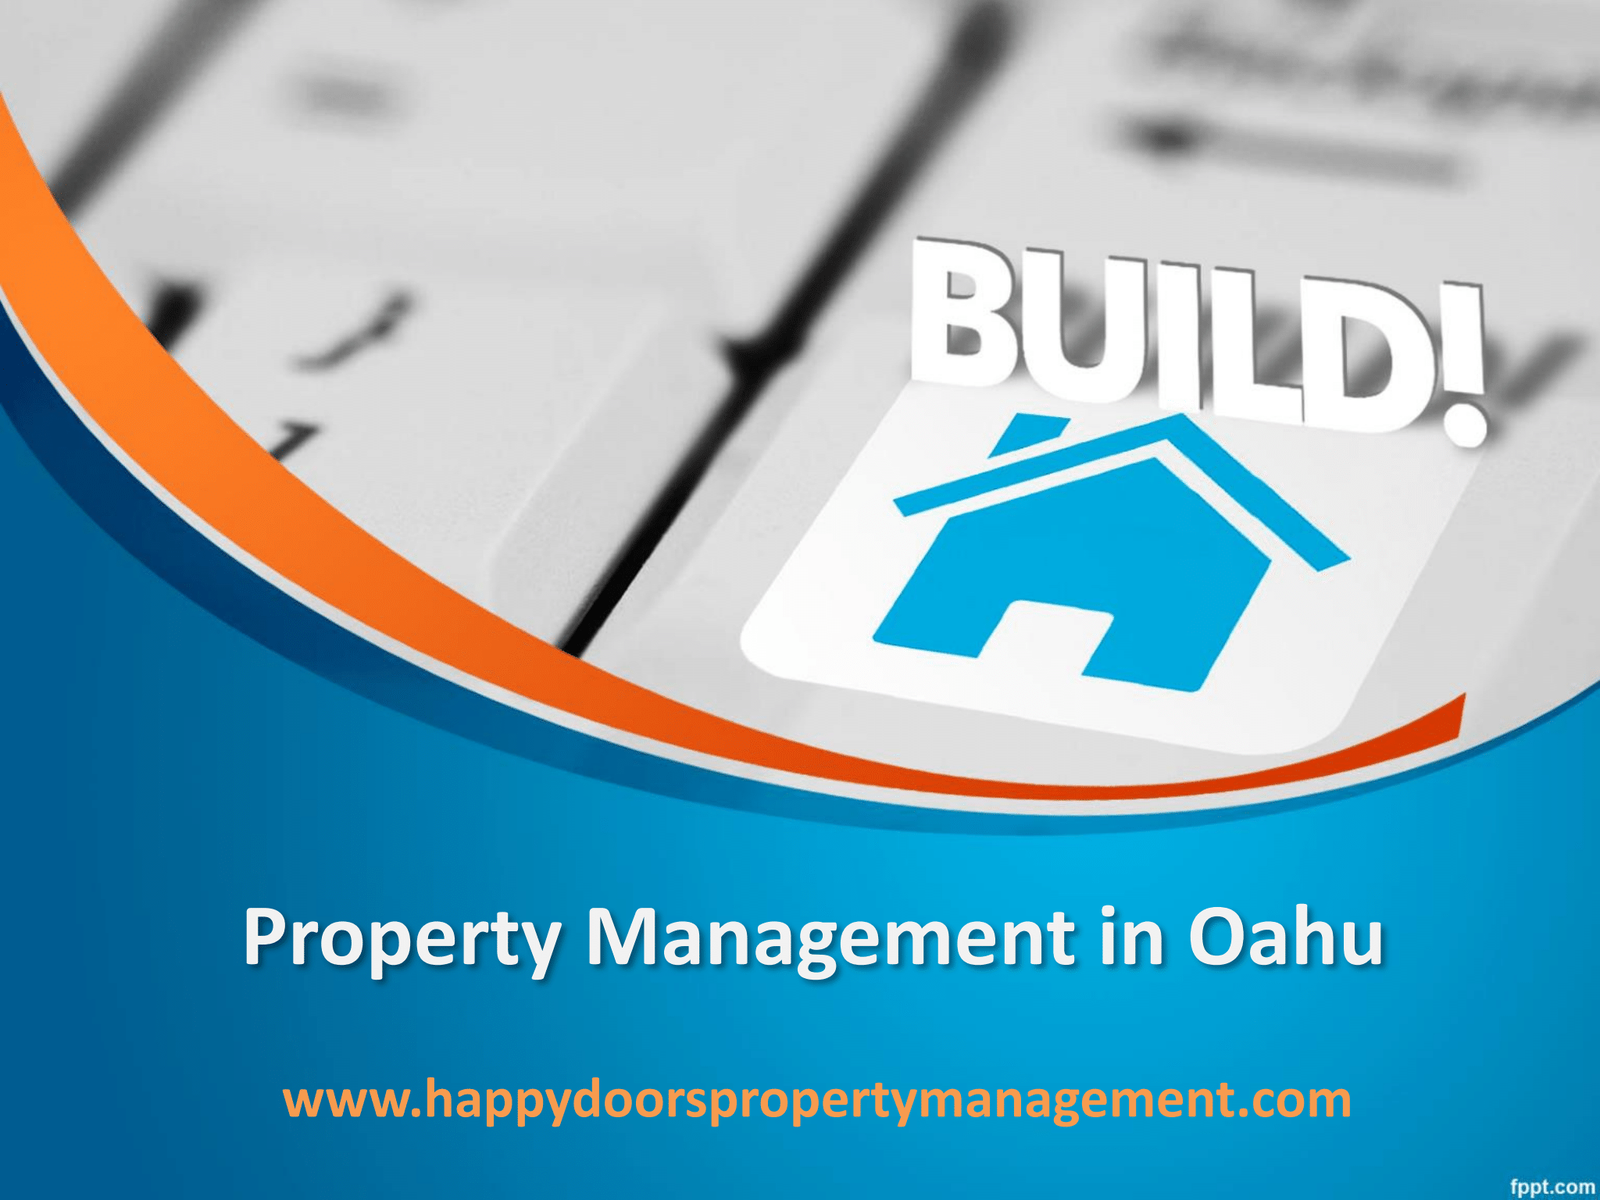 Dropbox - Property Management in Oahu - Happydoors Property Management.pptx